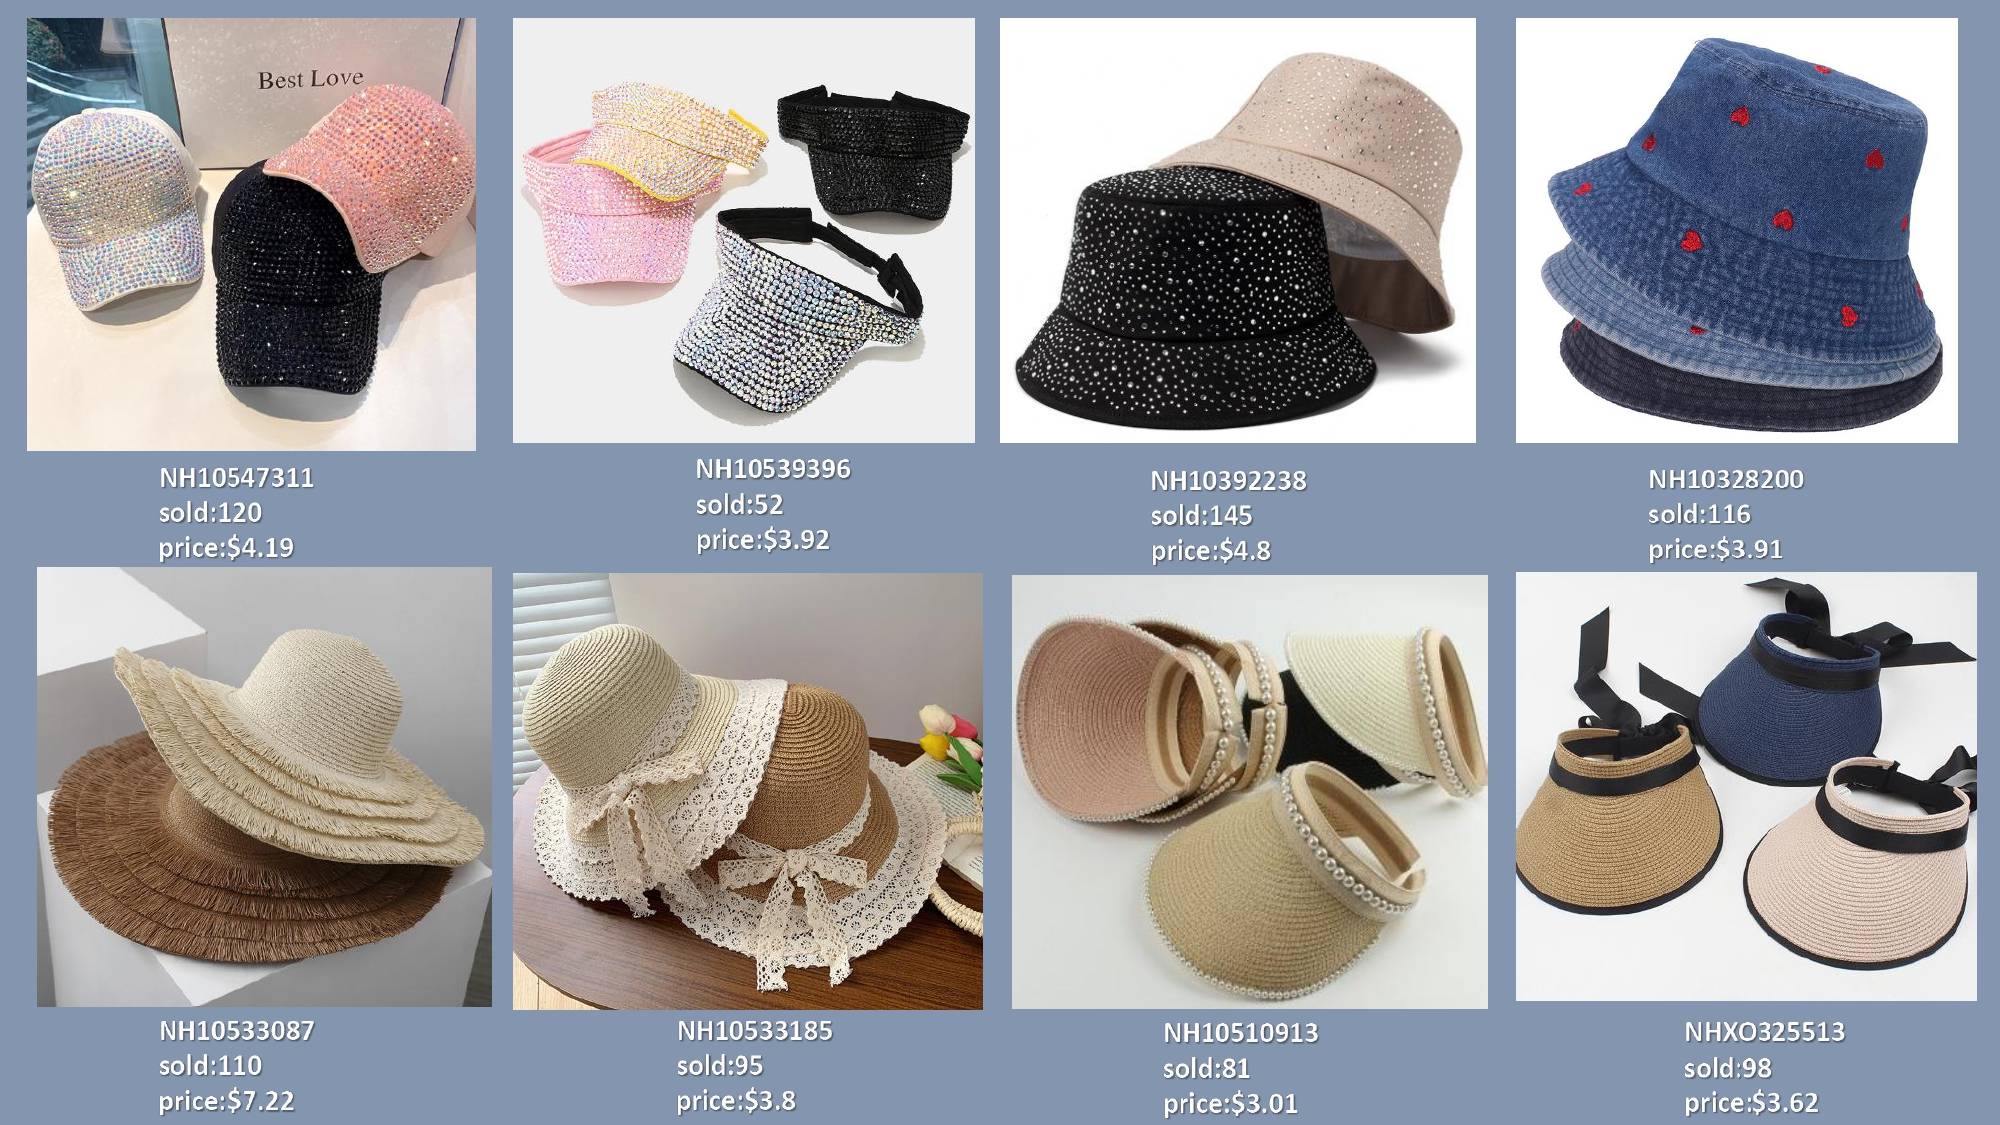 Hats are one of the must-have fashion accessories for ladies.